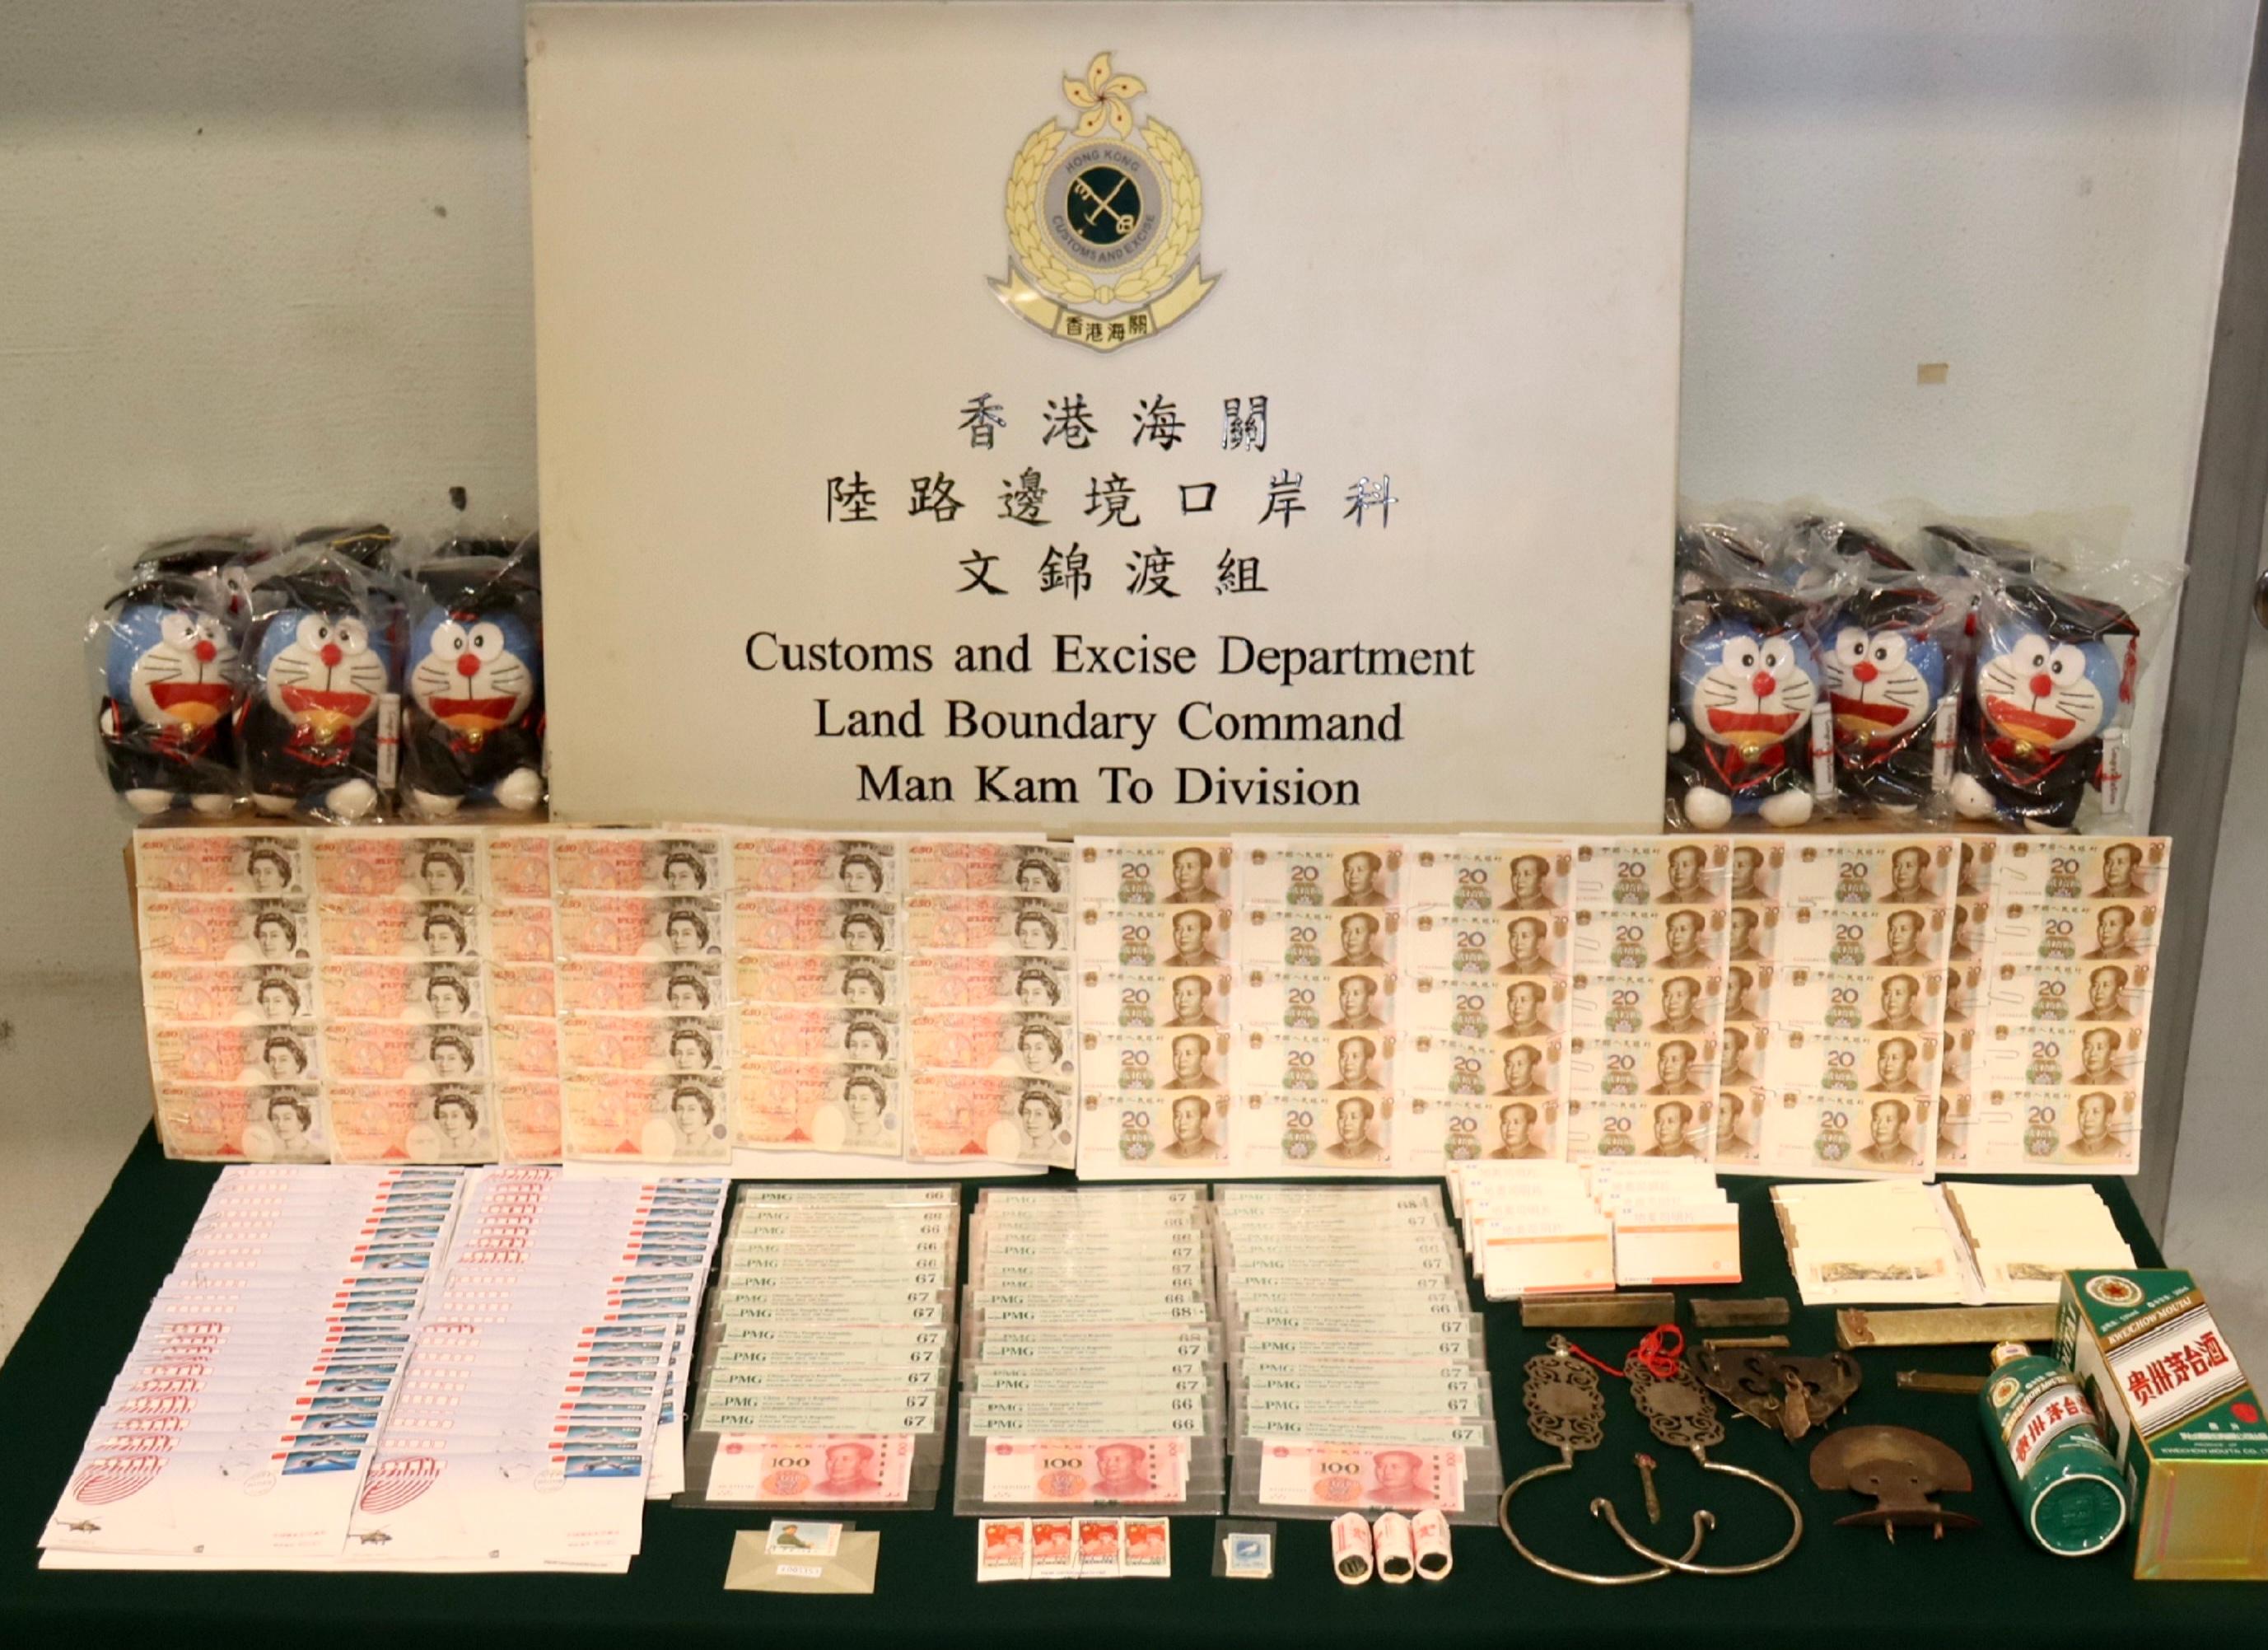 Hong Kong Customs seized a batch of suspected smuggled goods with an estimated market value of about $1.2 million at Man Kam To Control Point on July 18. Most of the seizures were collectibles with a speculative price, including seven types of old banknotes, commemorative coins, archaic bronze art pieces as well as stamps and commemorative envelopes. In addition, it also included duty-not-paid liquor, suspected controlled pharmaceutical products and suspected counterfeit goods. Photo shows some of the suspected smuggled goods seized.